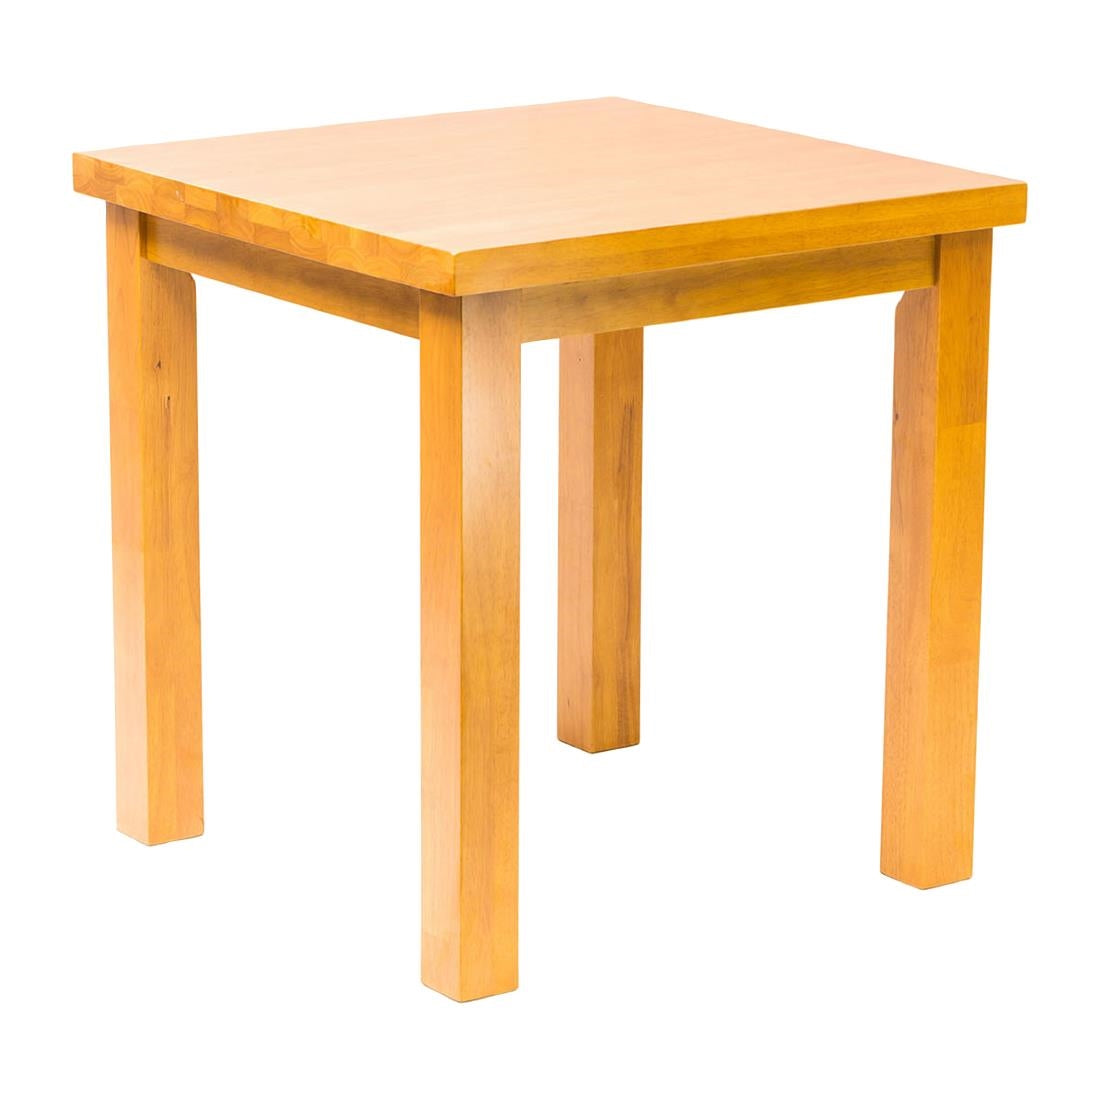 FT488 Kendal Square Dining Table Soft Oak 700x700mm JD Catering Equipment Solutions Ltd